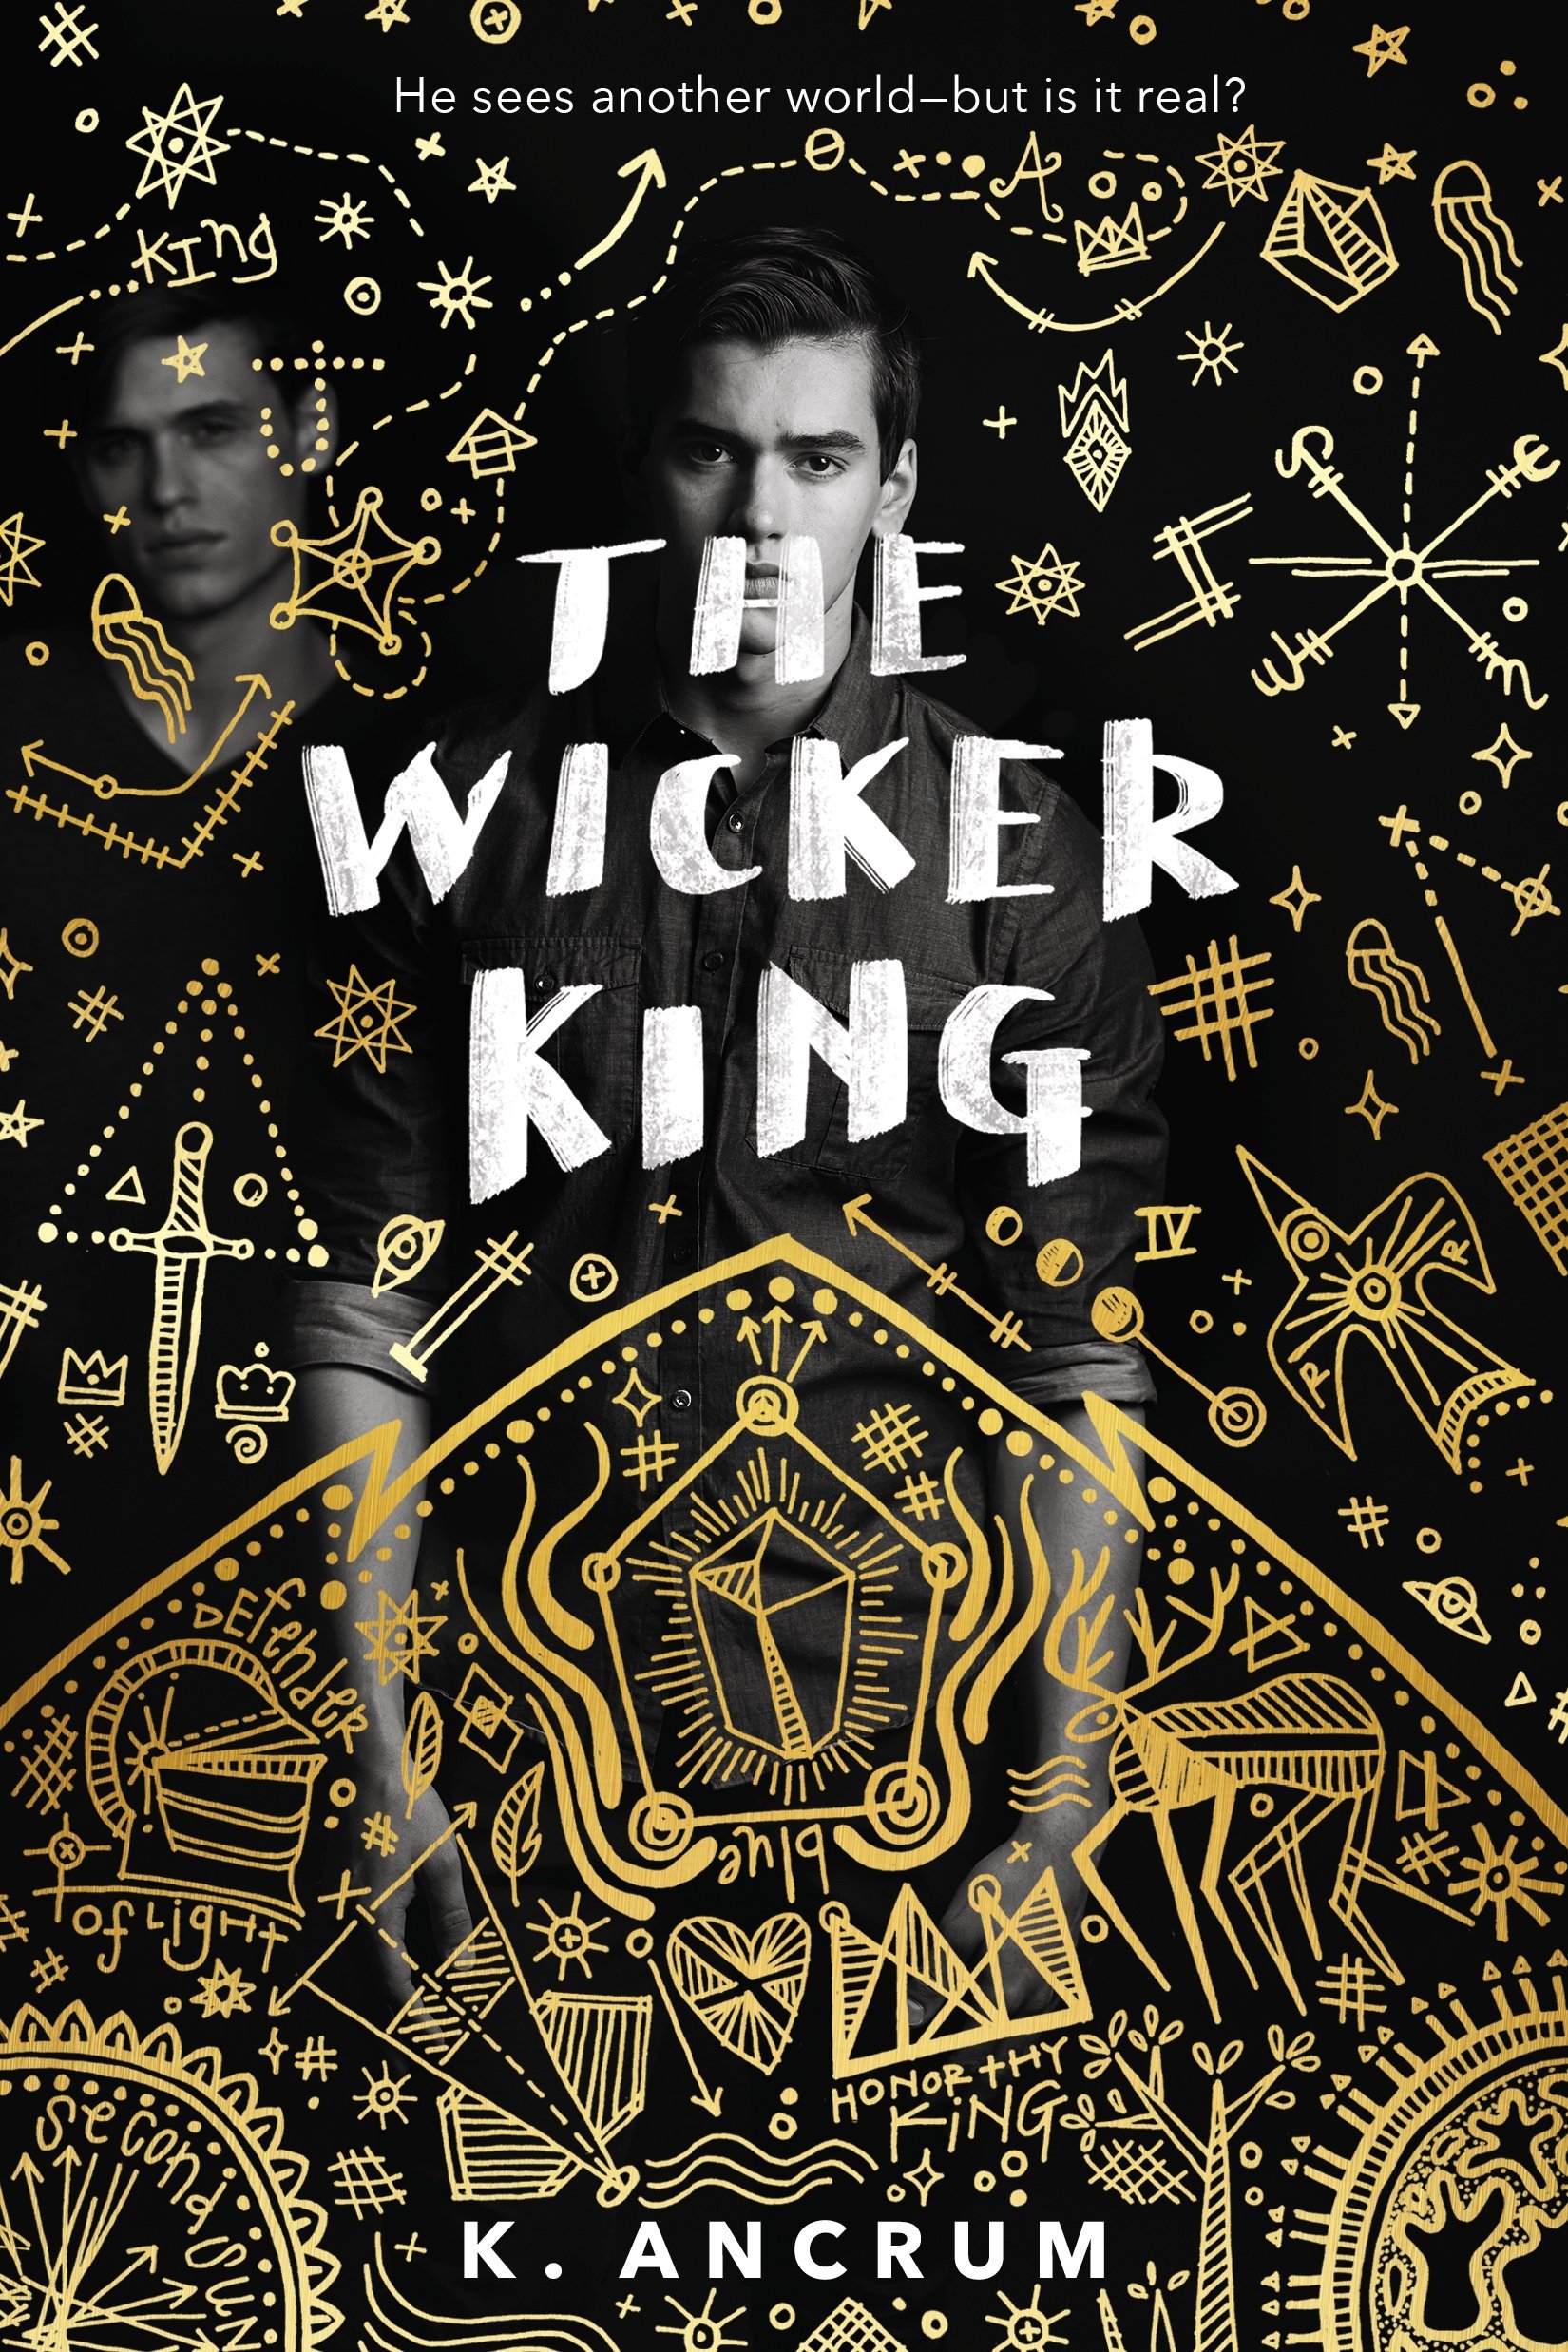 The Wicker King, by K. Ancrum